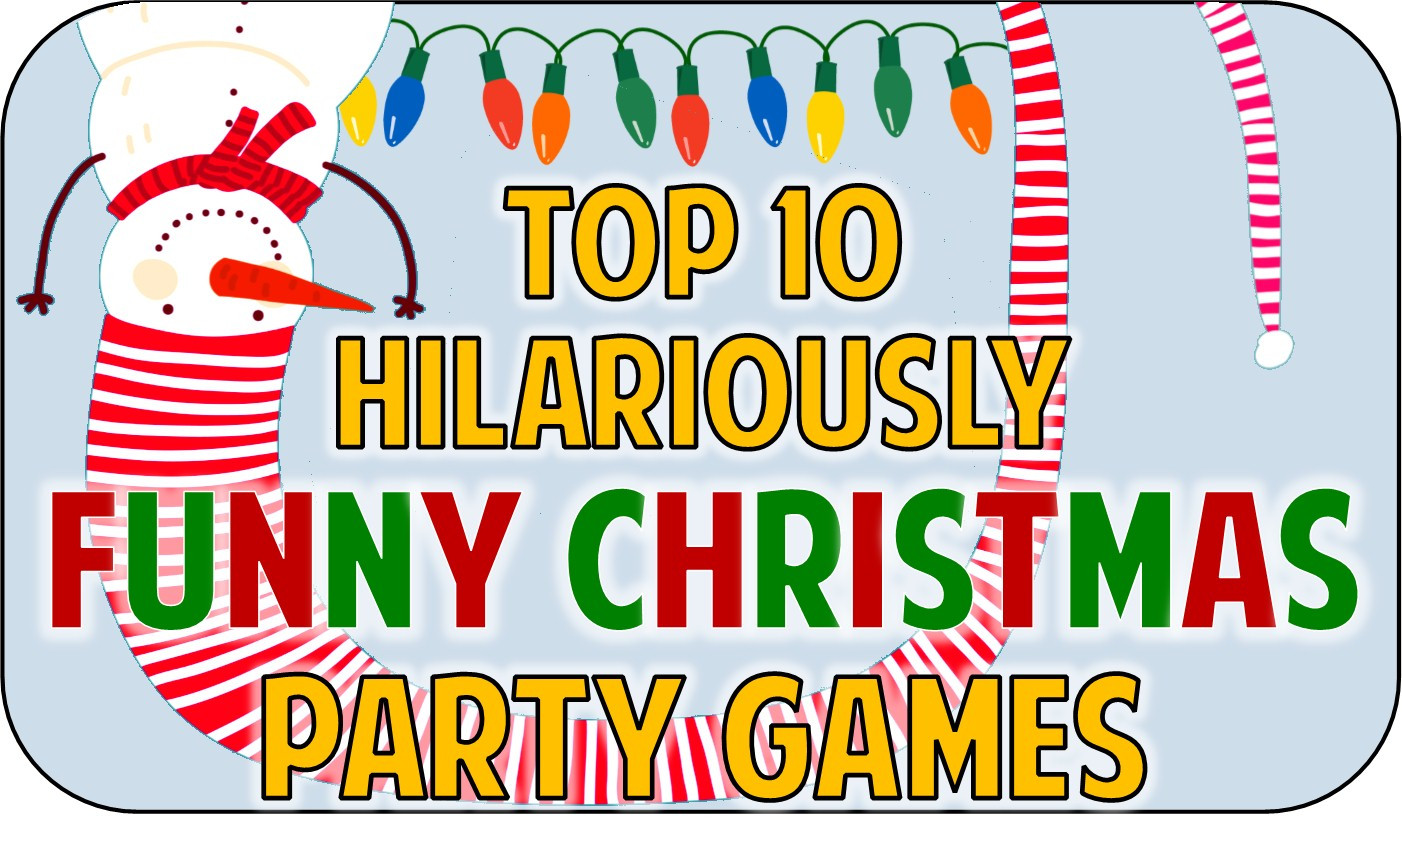 Christmas Party Game Ideas For Adults
 Christmas Party fice Games